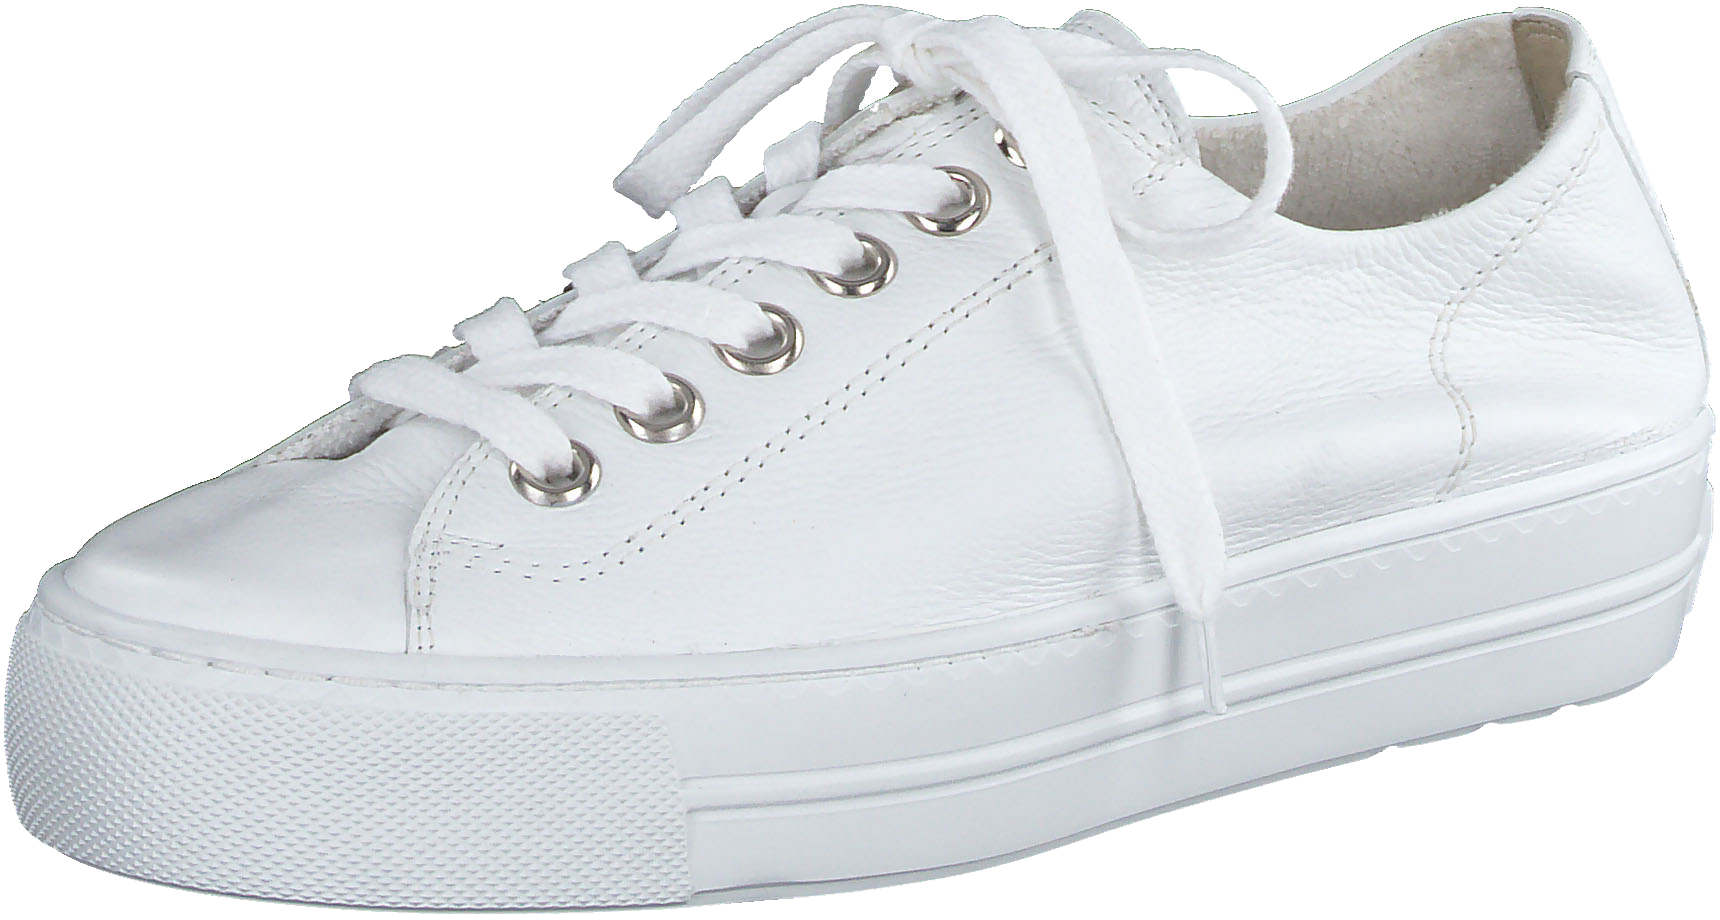 Paul Green Super Soft - White smooth leather